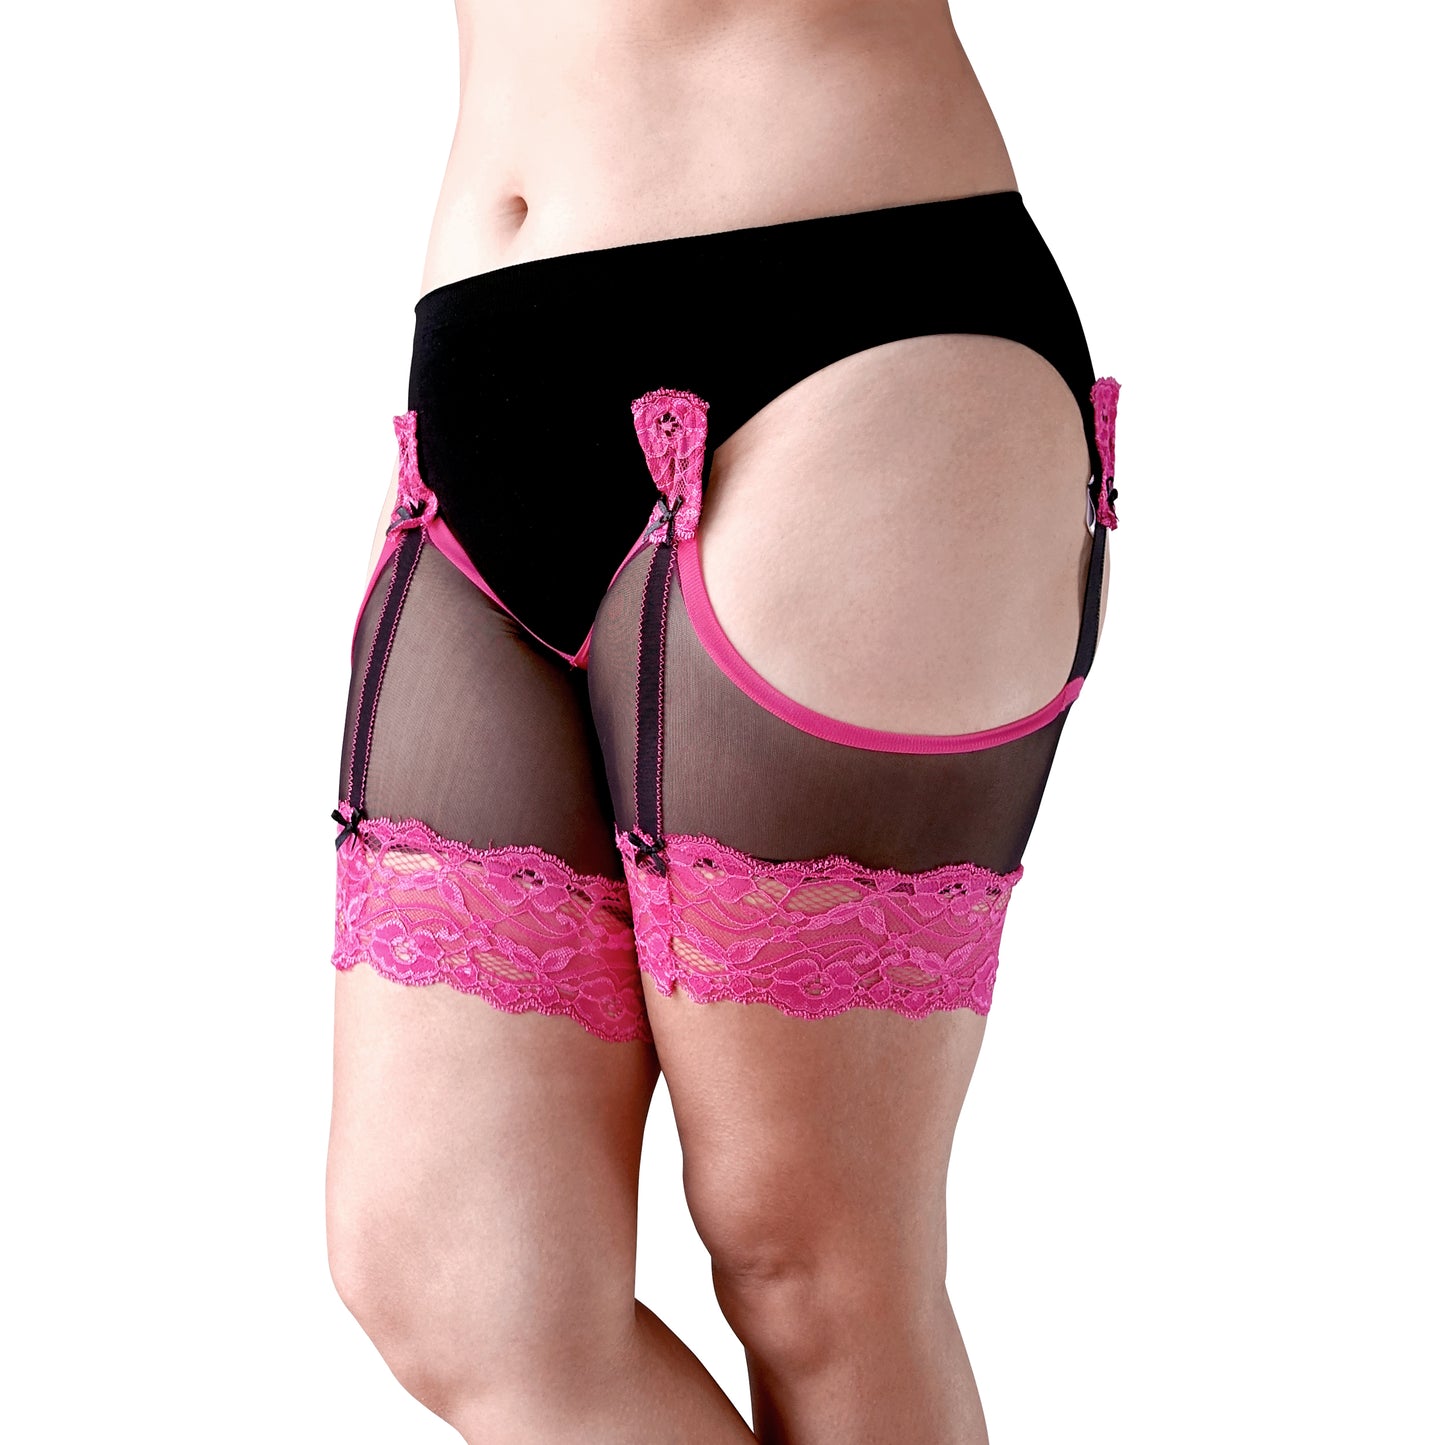 ANTI CHAFE Clip-On Thigh Bands - HOT PINK